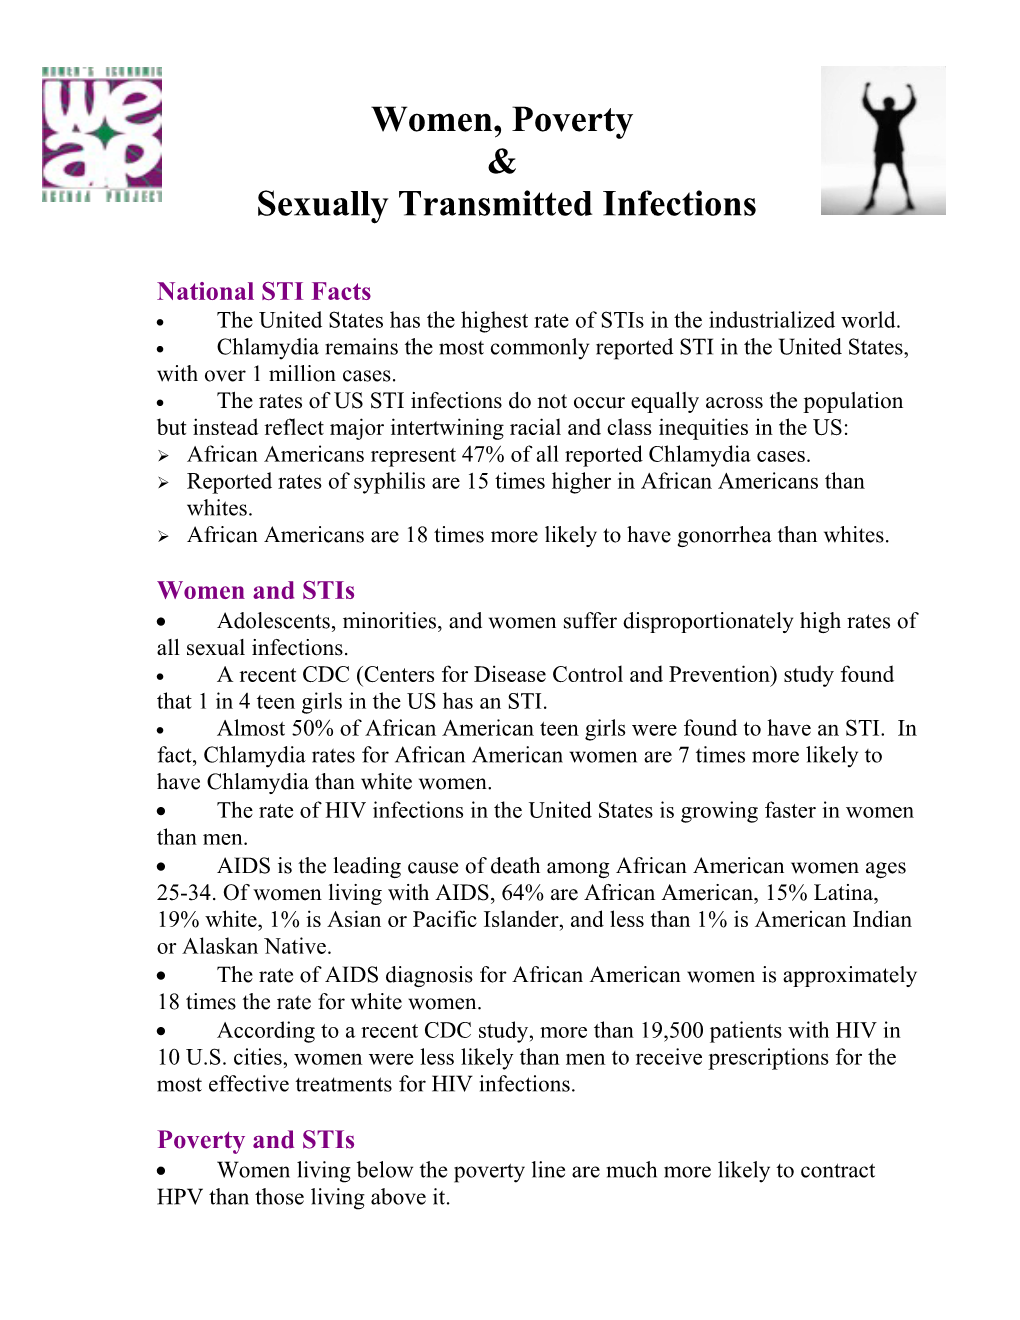 Women, Poverty & Sexually Transmitted Diseases